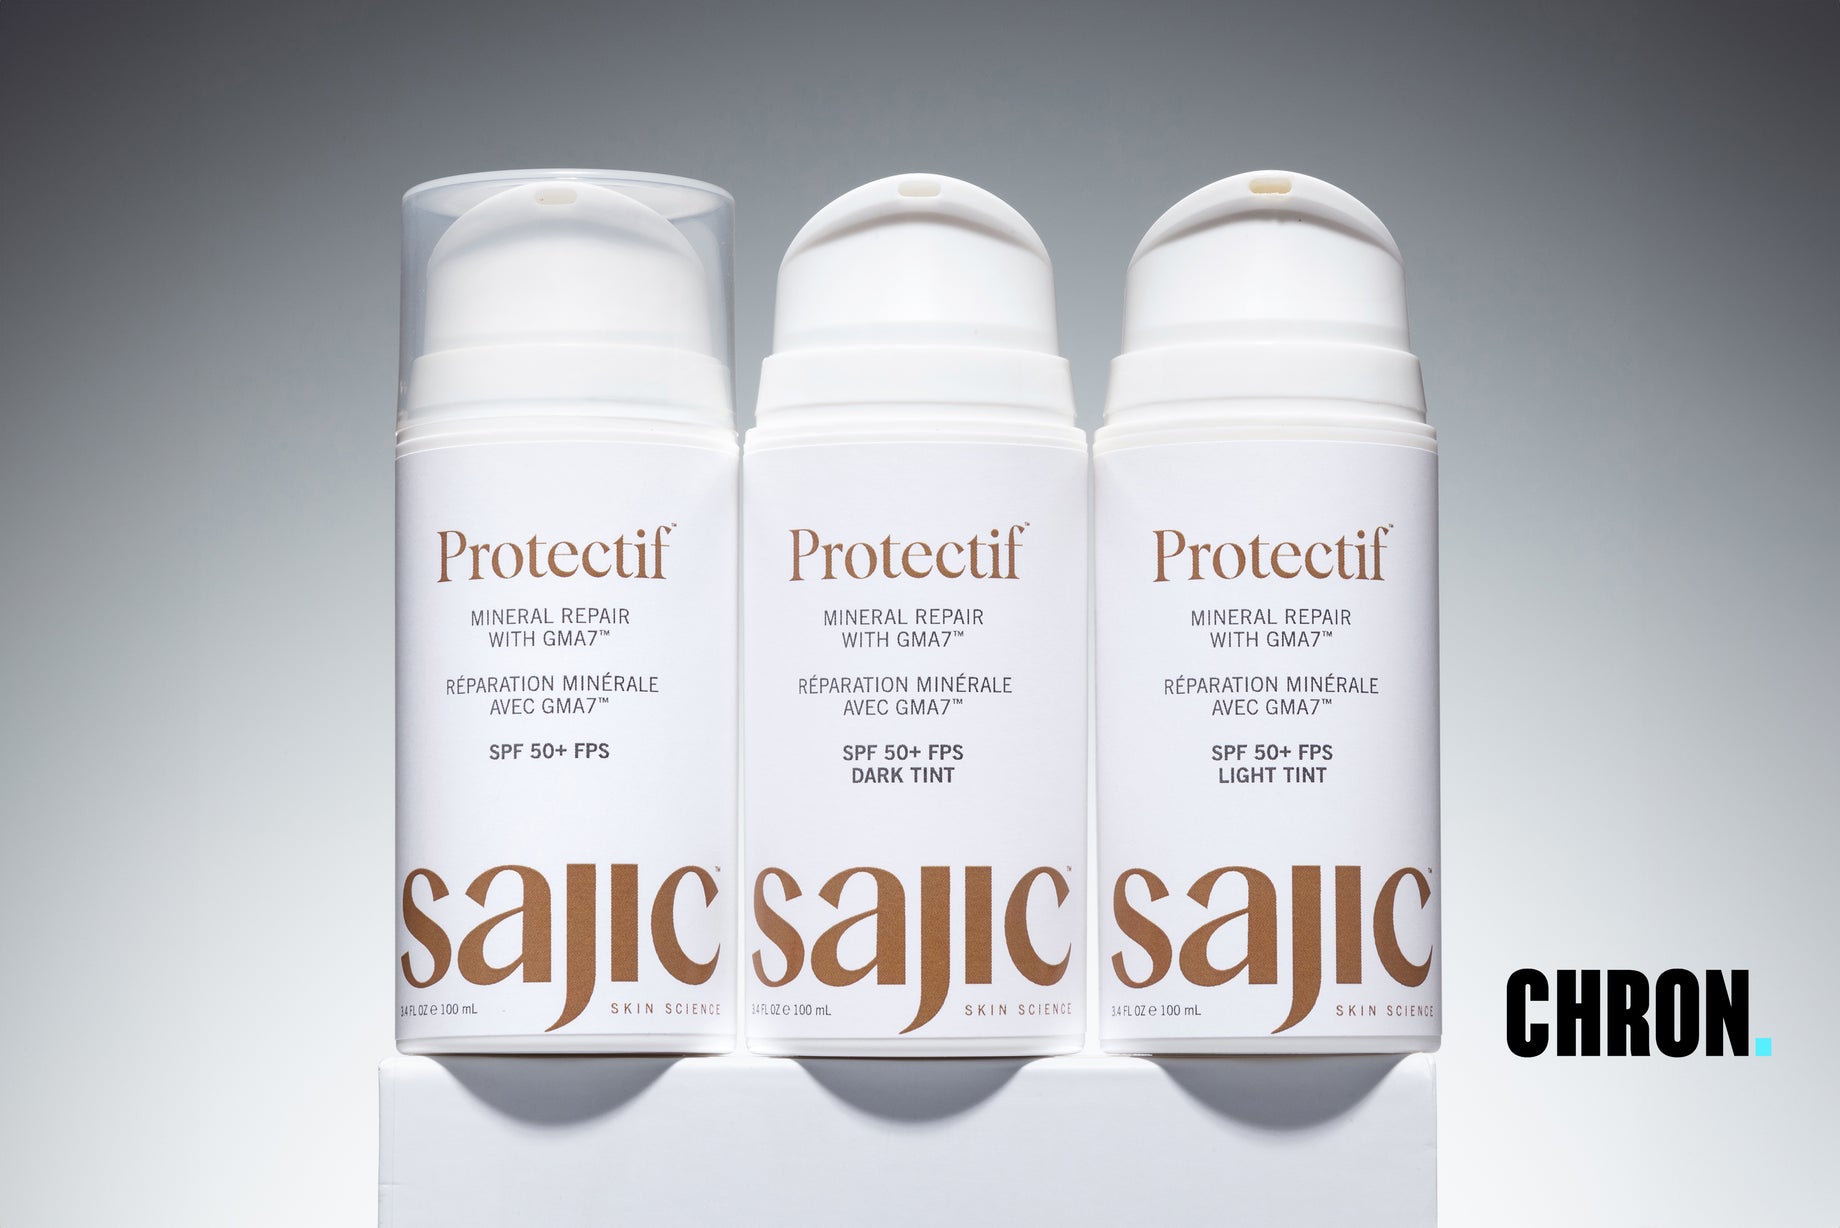 Headed-to-Hawaii-this-summer-Make-sure-your-sunscreen-is-reef-safe Sajic Skin Science